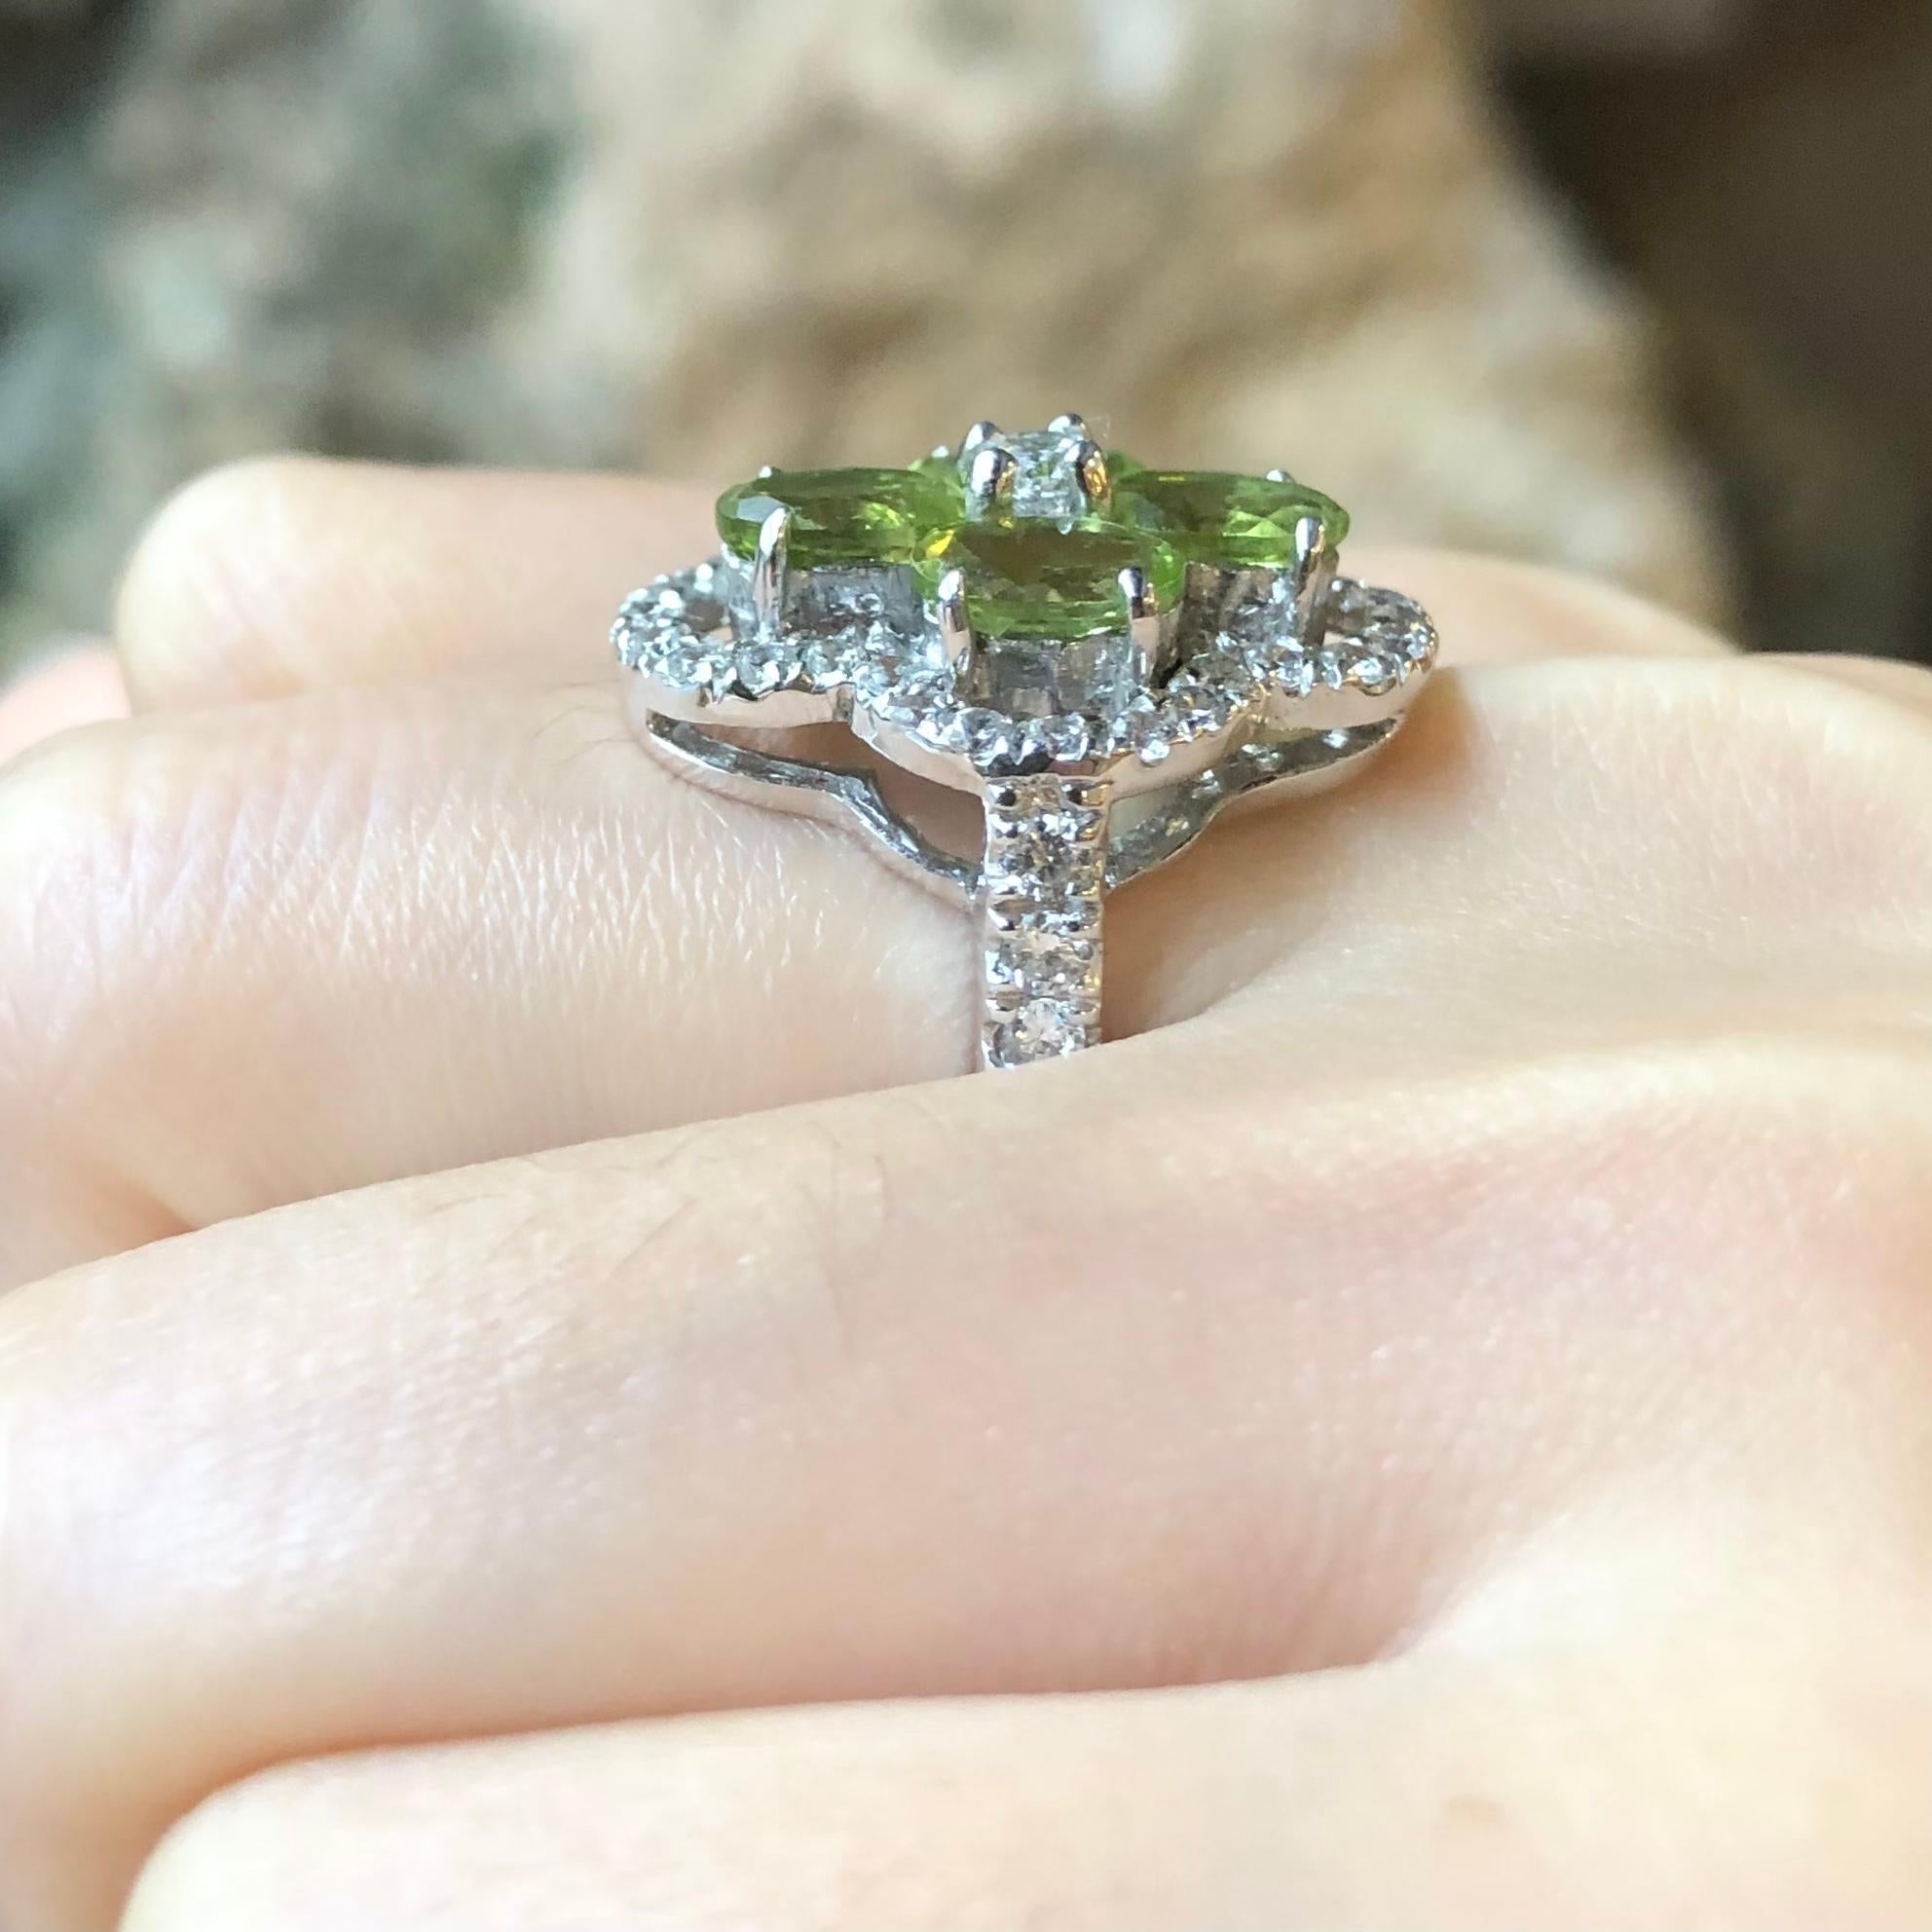 Peridot with Cubic Zirconia Ring set in Silver Settings

Width:  0.7 cm 
Length: 2.3 cm
Ring Size: 56
Total Weight: 6.56 grams

*Please note that the silver setting is plated with rhodium to promote shine and help prevent oxidation.  However, with